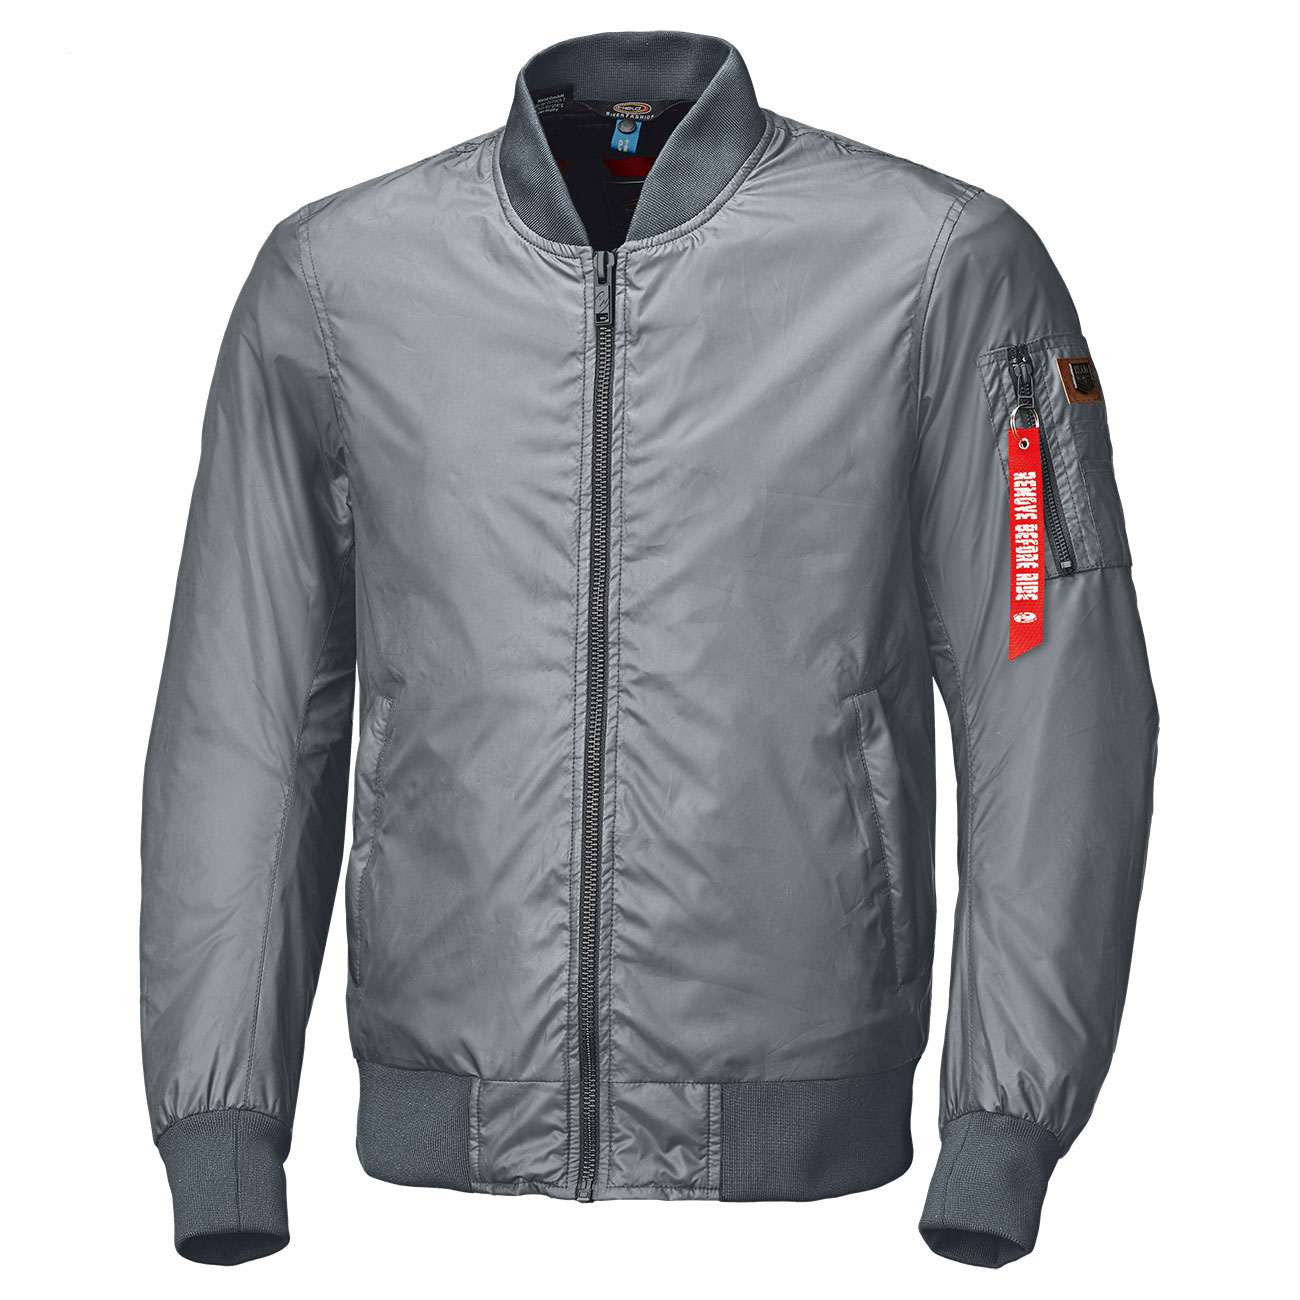 Image of Held Palermo Jacket Gray Size S ID 4049462911888